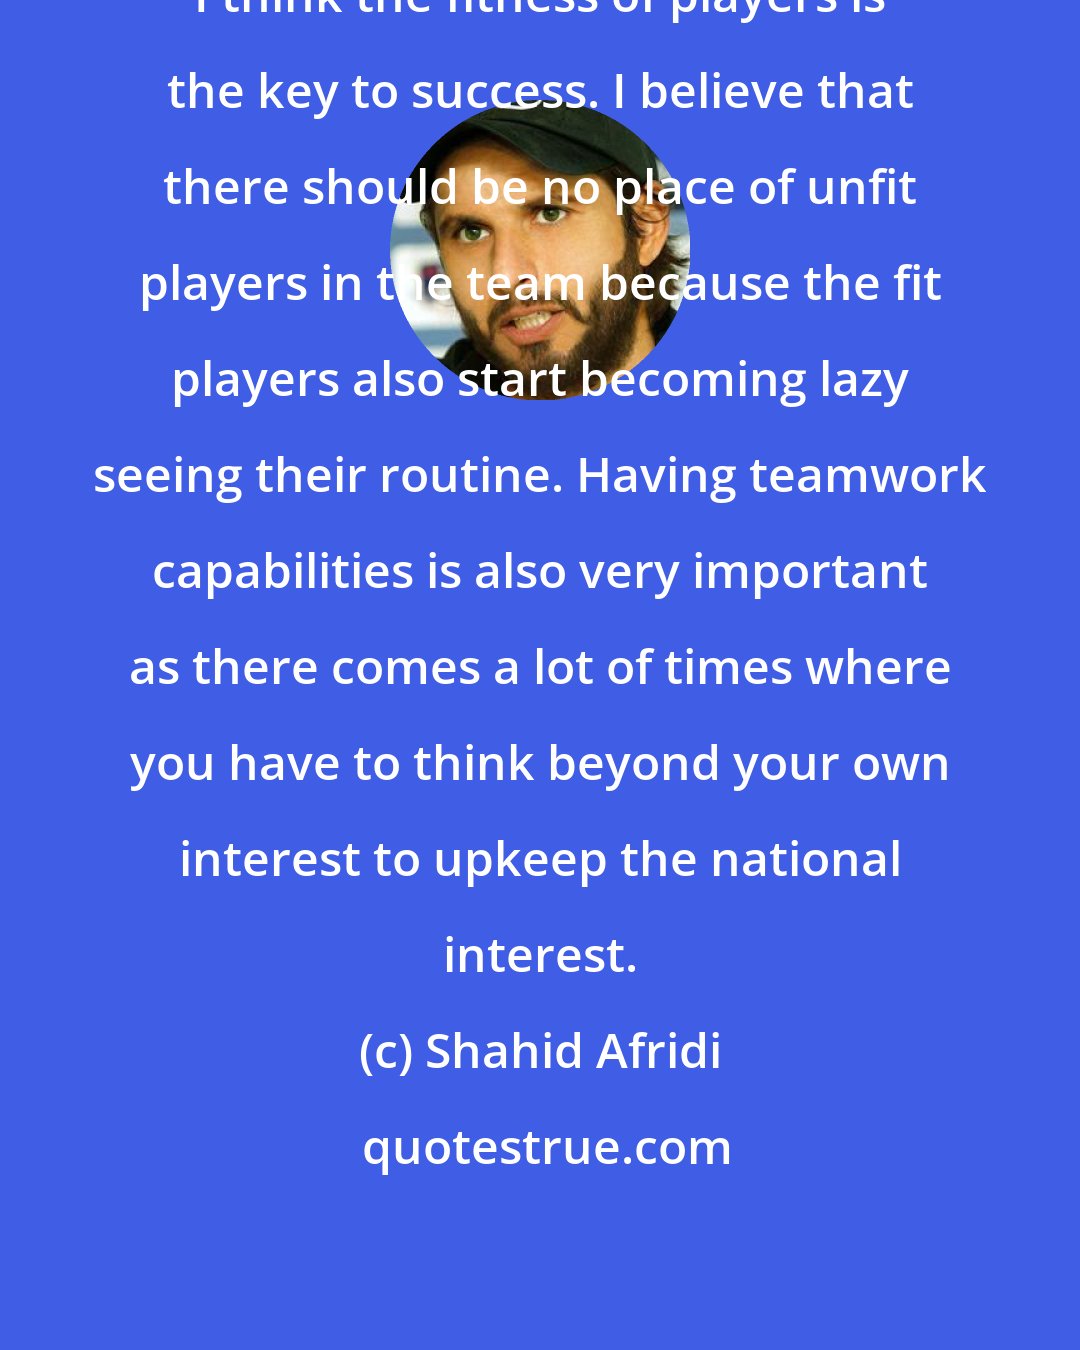 Shahid Afridi: I think the fitness of players is the key to success. I believe that there should be no place of unfit players in the team because the fit players also start becoming lazy seeing their routine. Having teamwork capabilities is also very important as there comes a lot of times where you have to think beyond your own interest to upkeep the national interest.